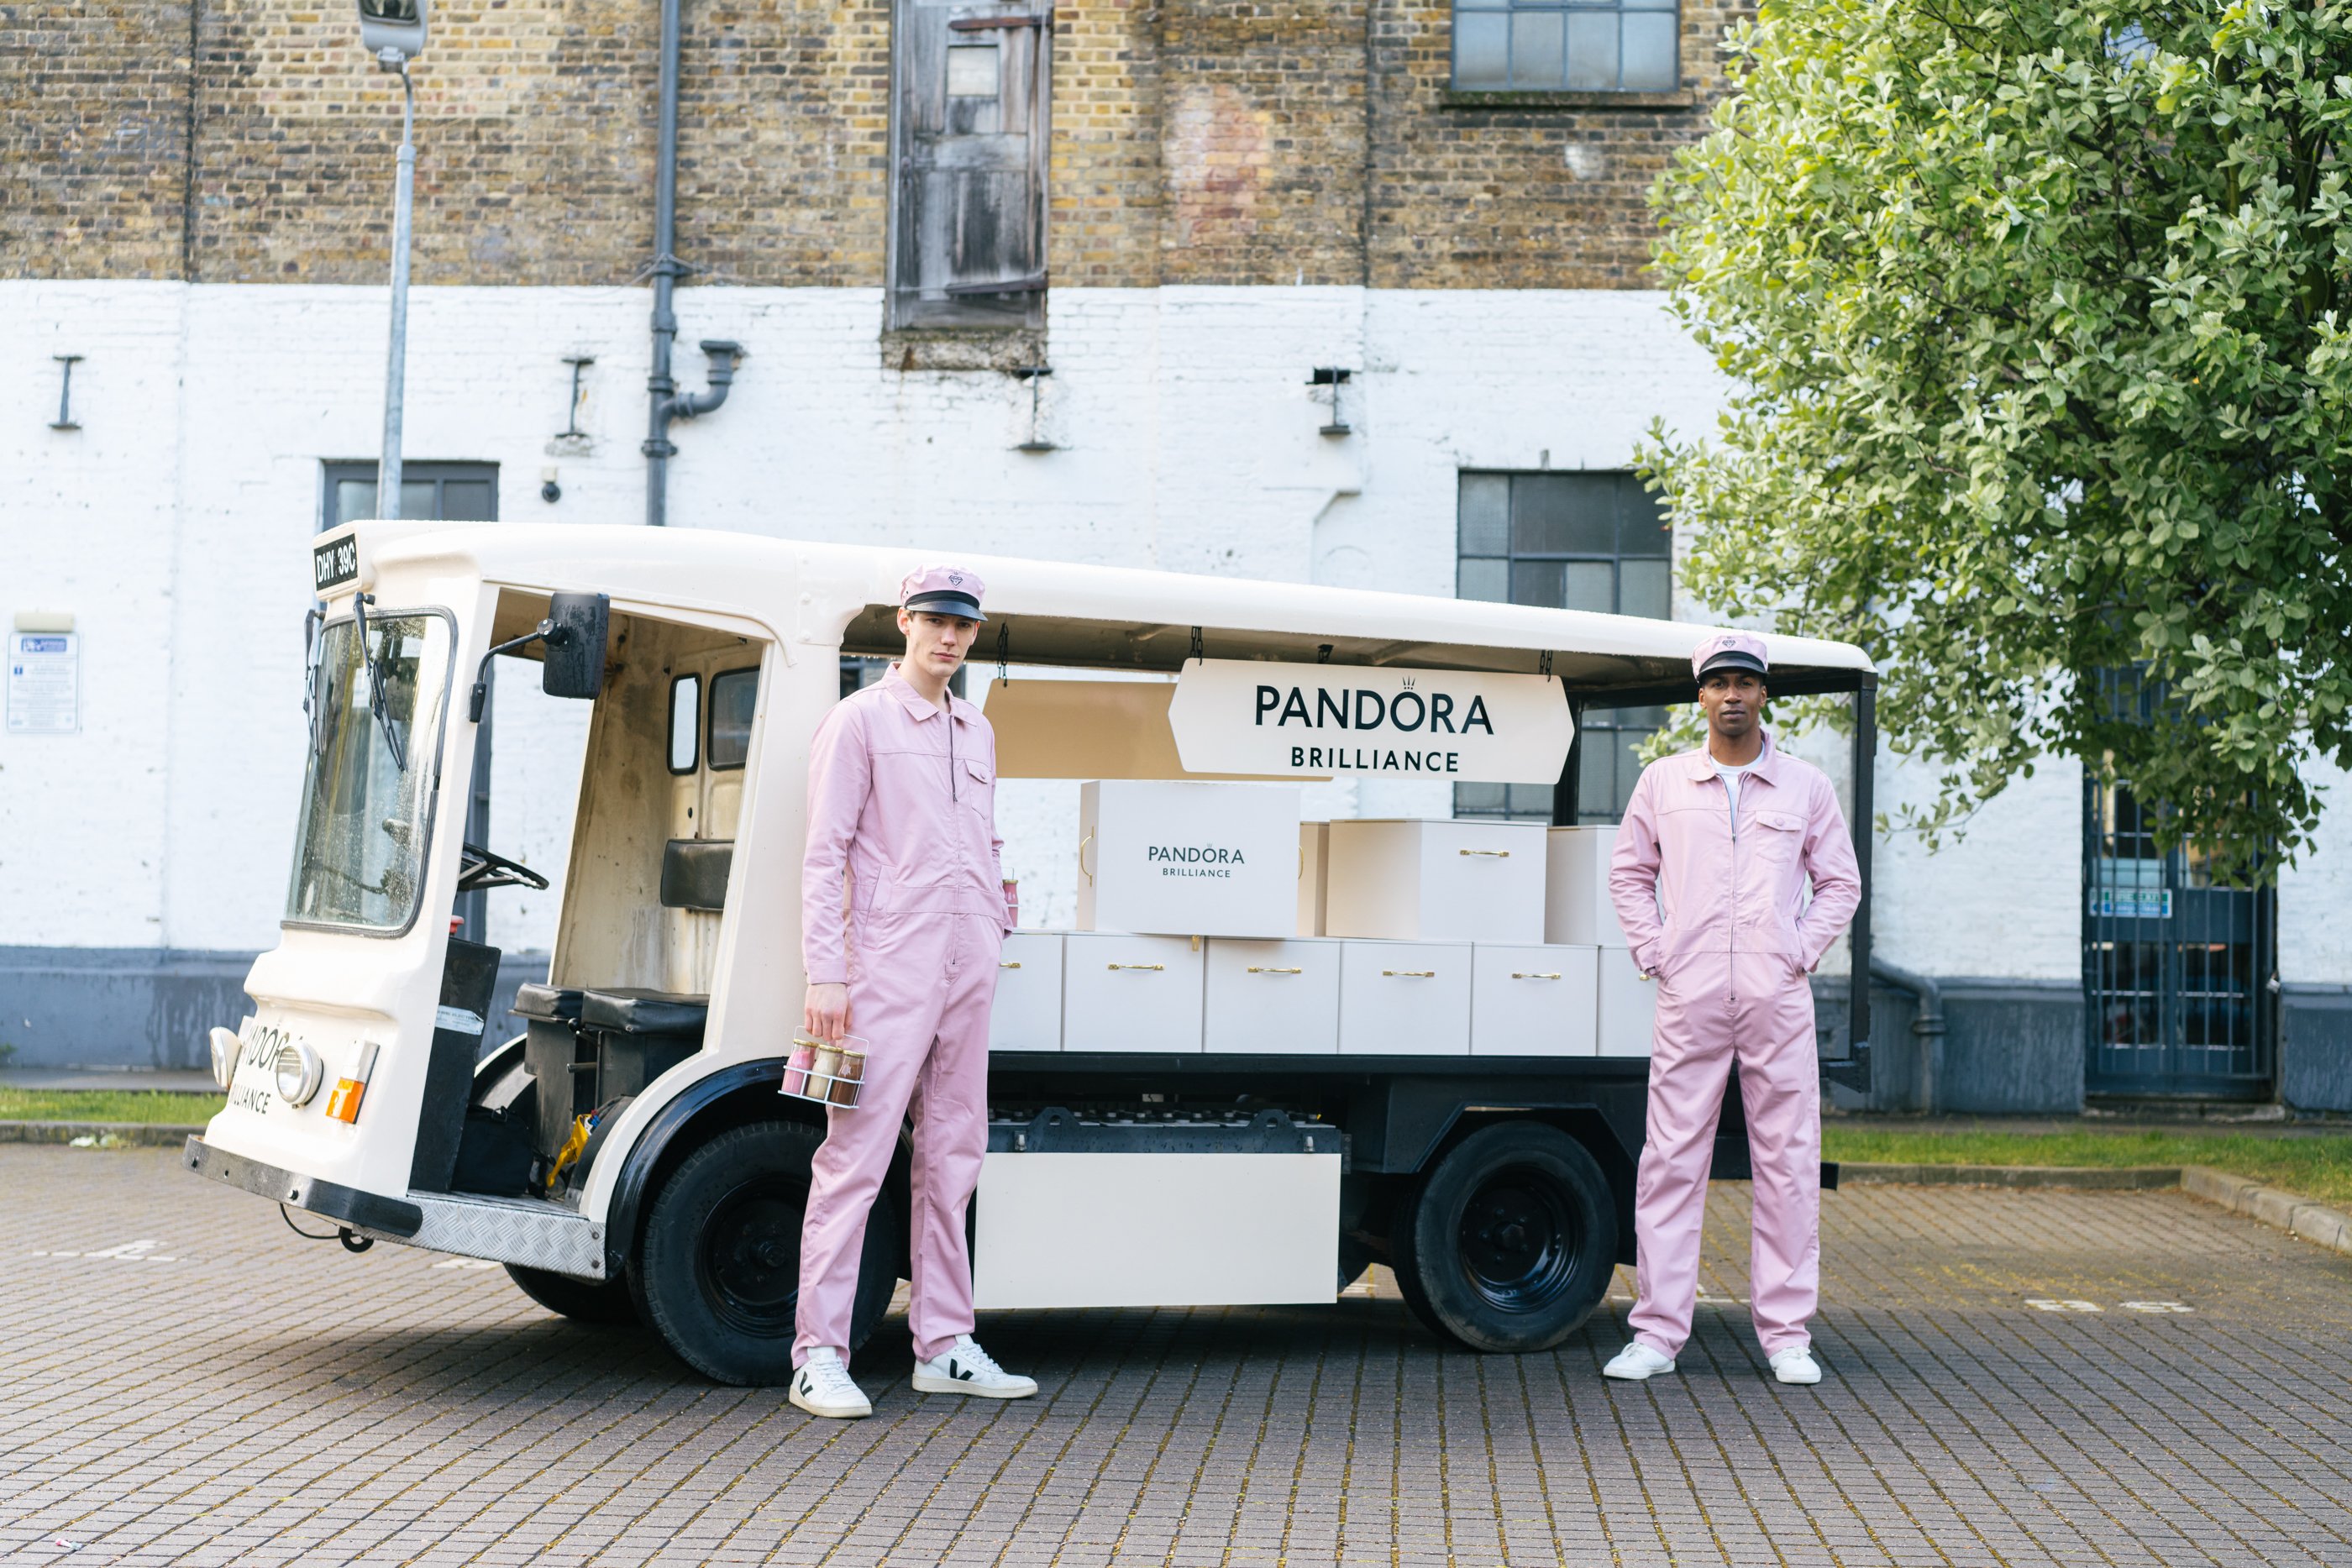 Electric milk float hire for Nyx brand campaign